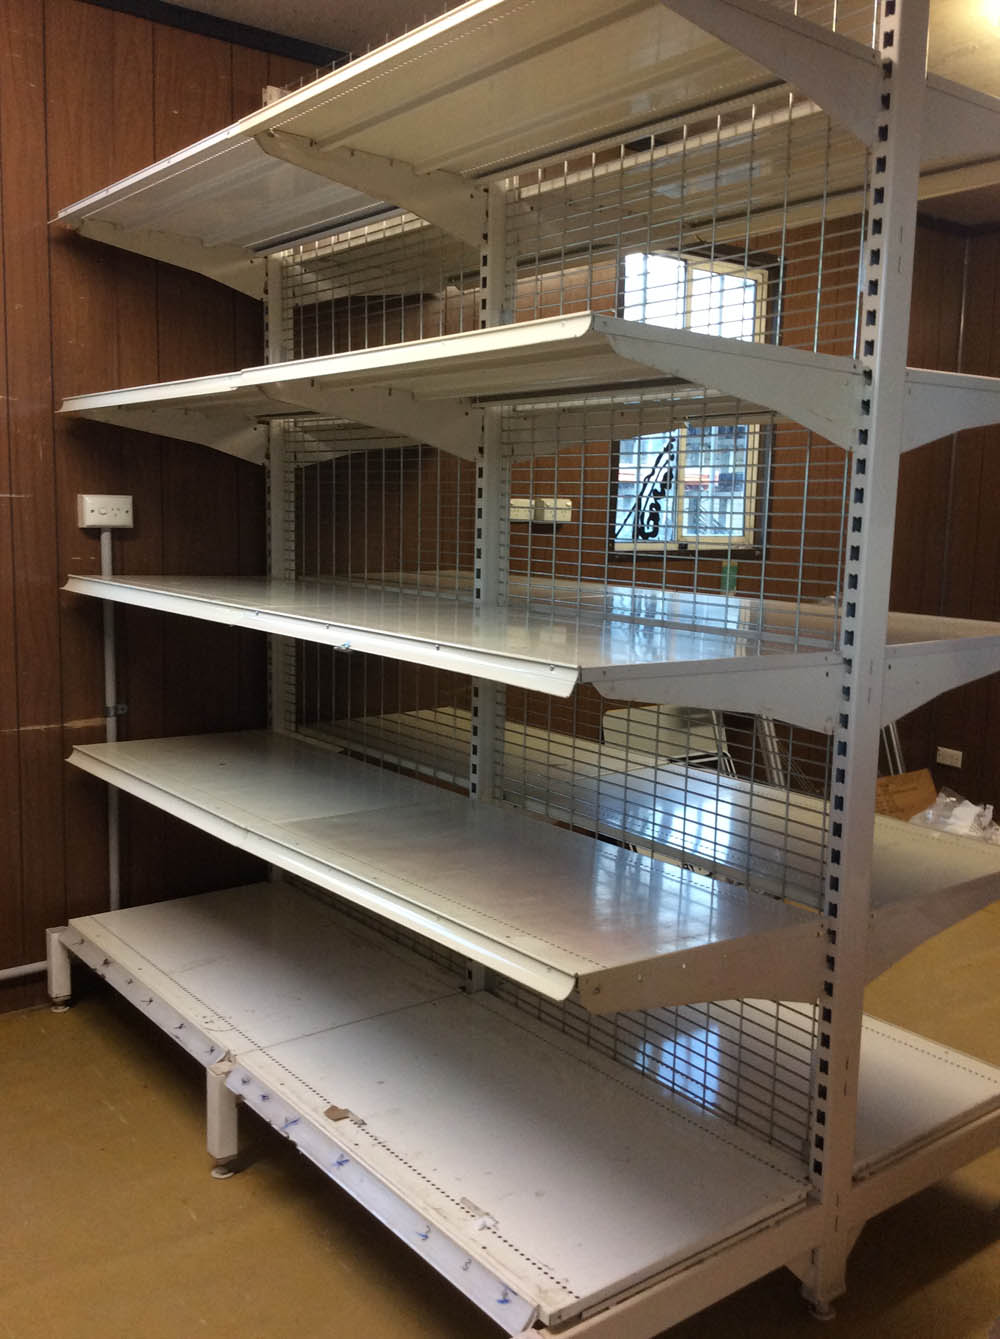 cantilever shelving - a j magnay